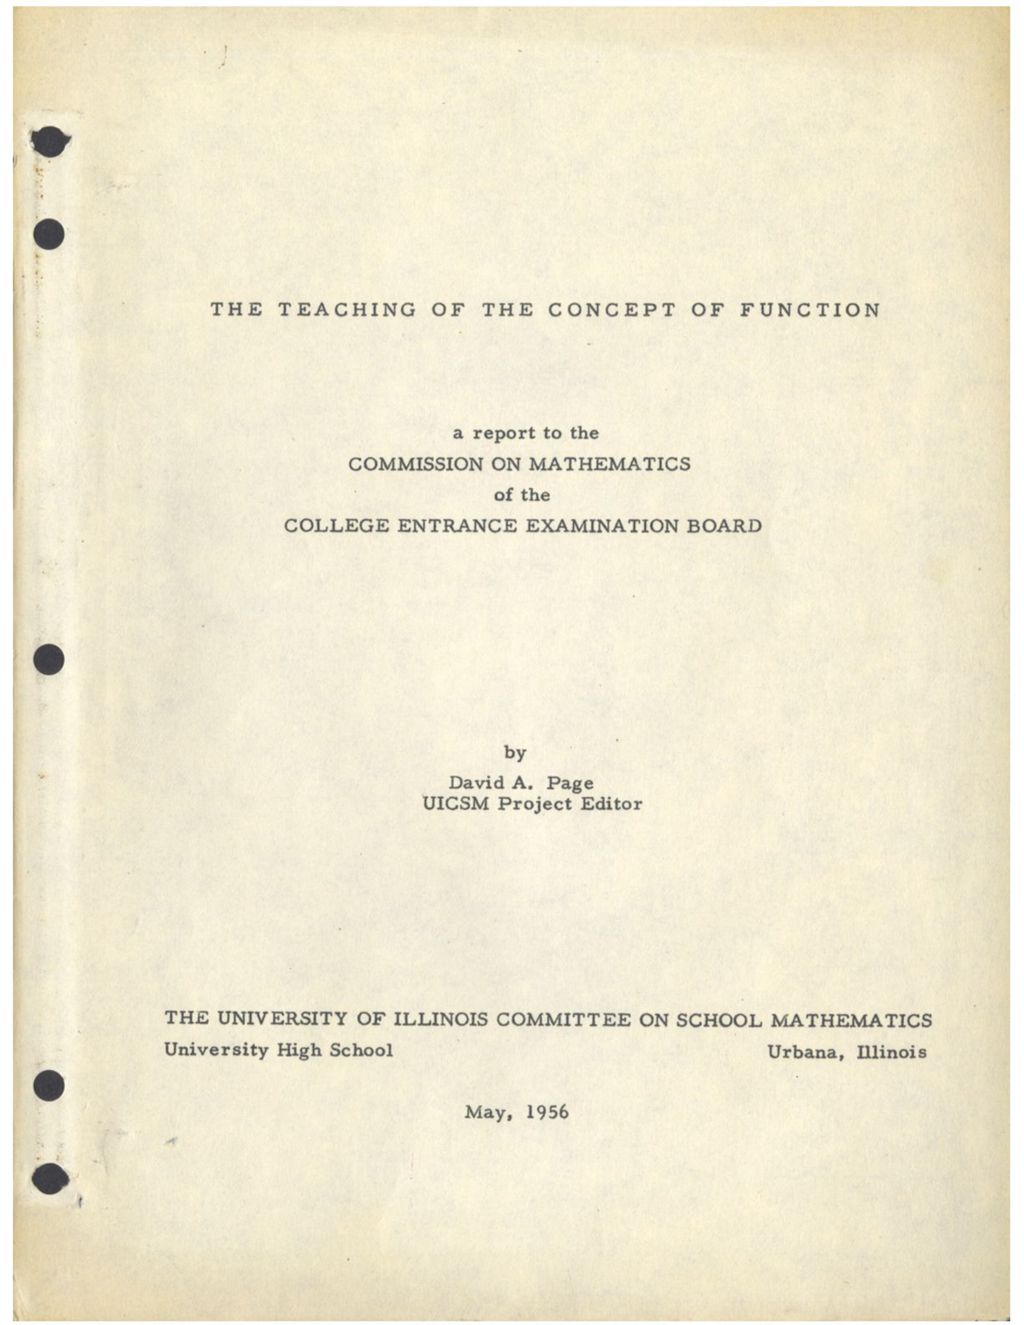 The Teaching of the Concept of Function, University of Illinois Committee on School Mathematics (UICSM), 1956